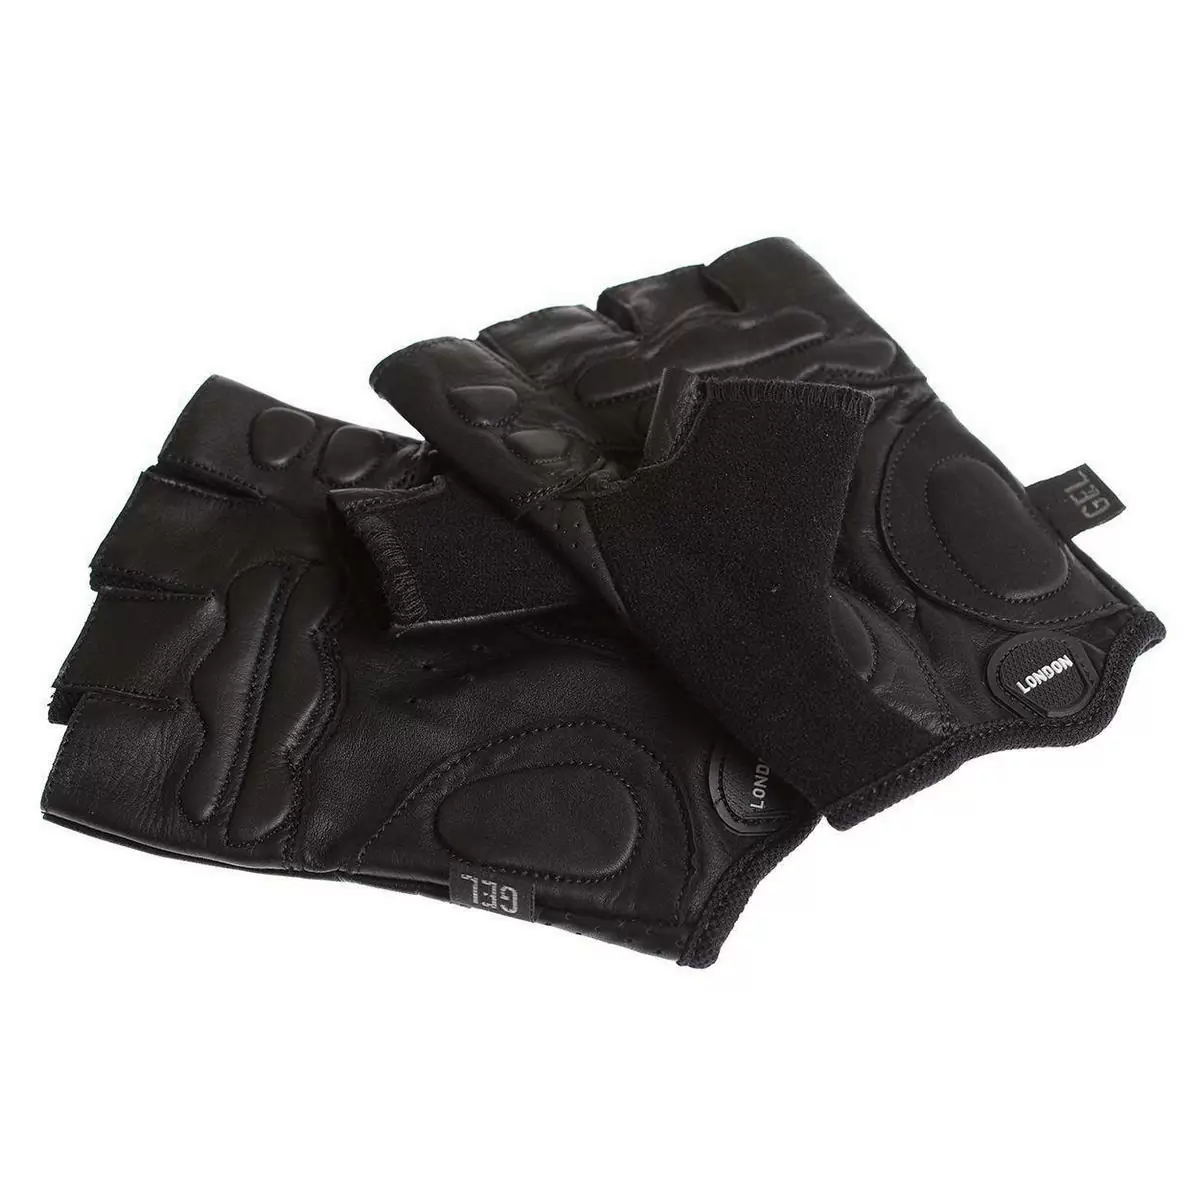 leather gloves classic sport size s black #2